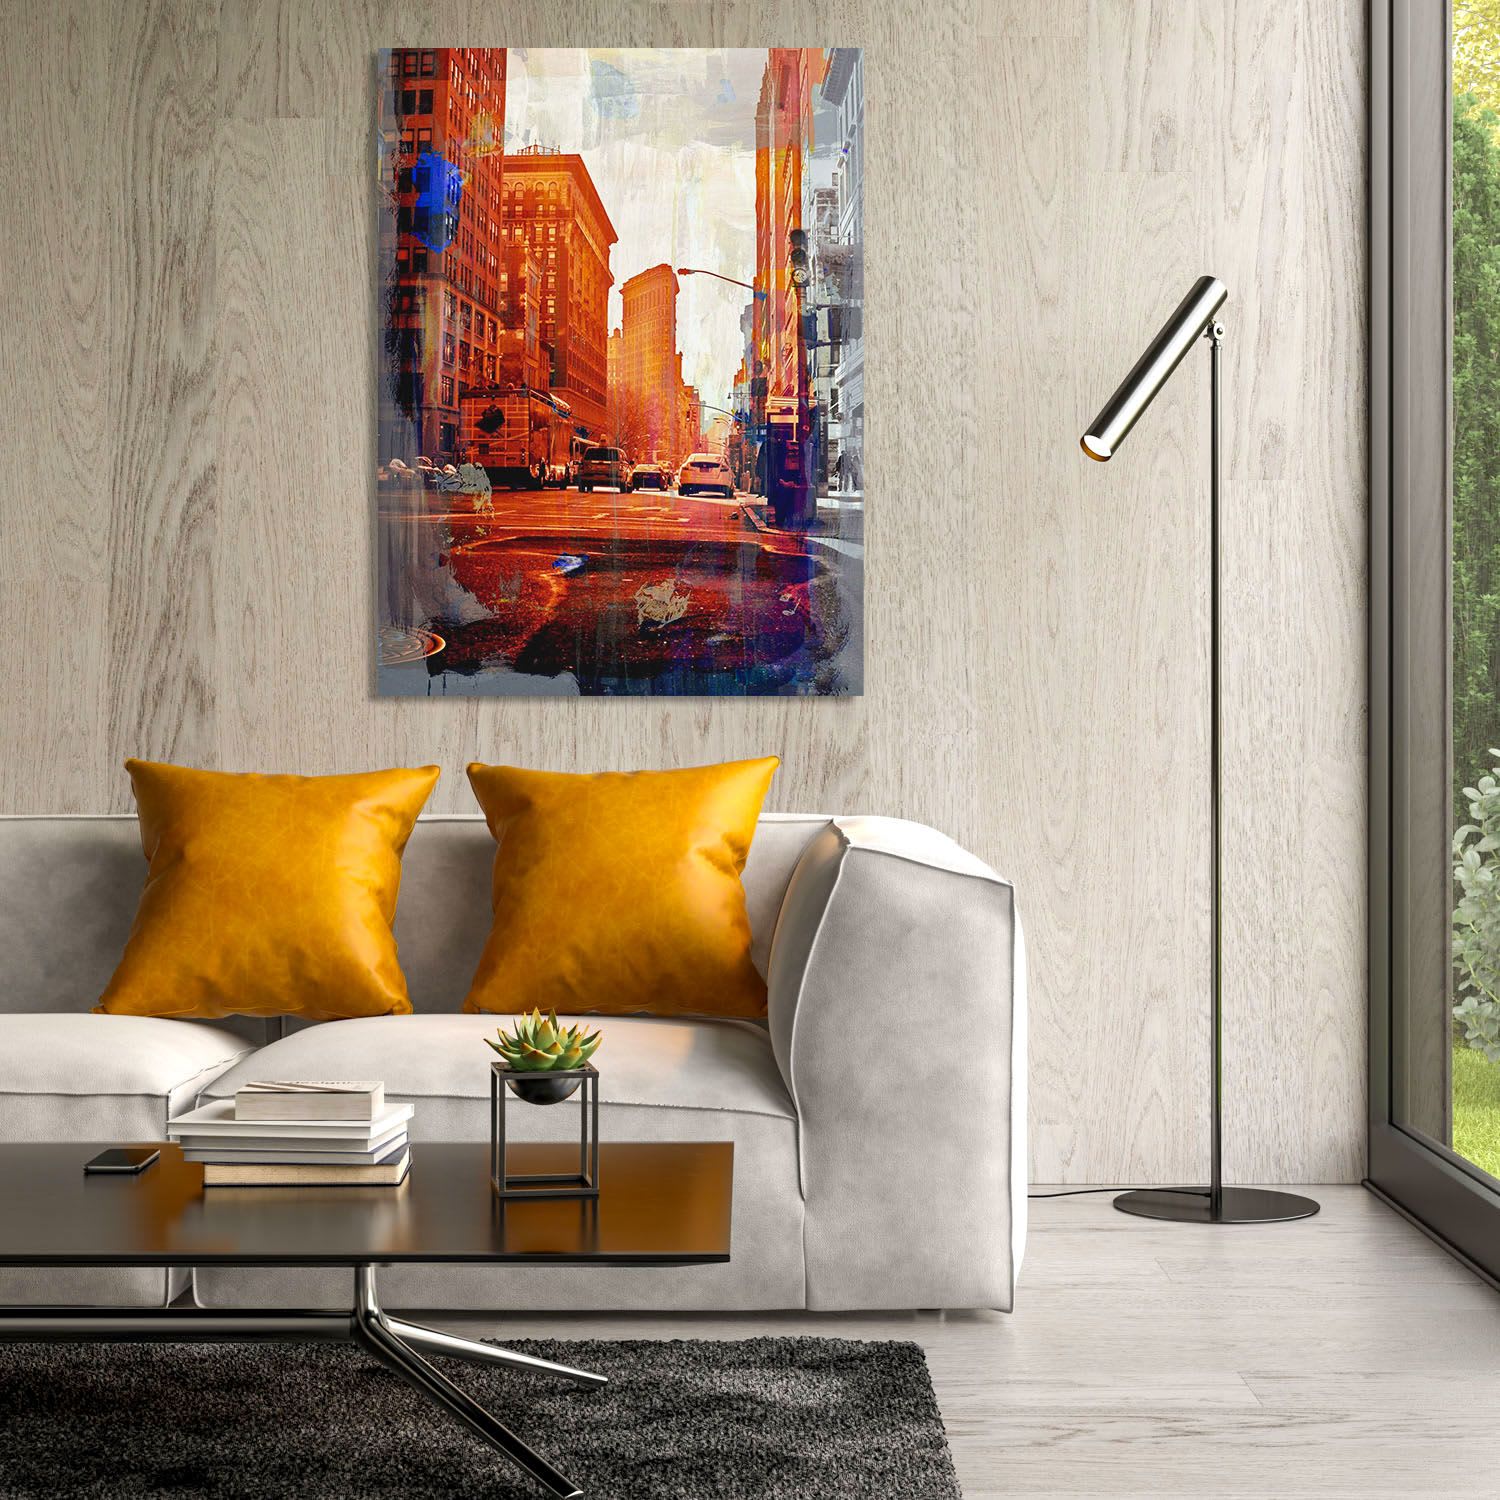 NY DOWNTOWN XV by Sven Pfrommer | Wescover Paintings